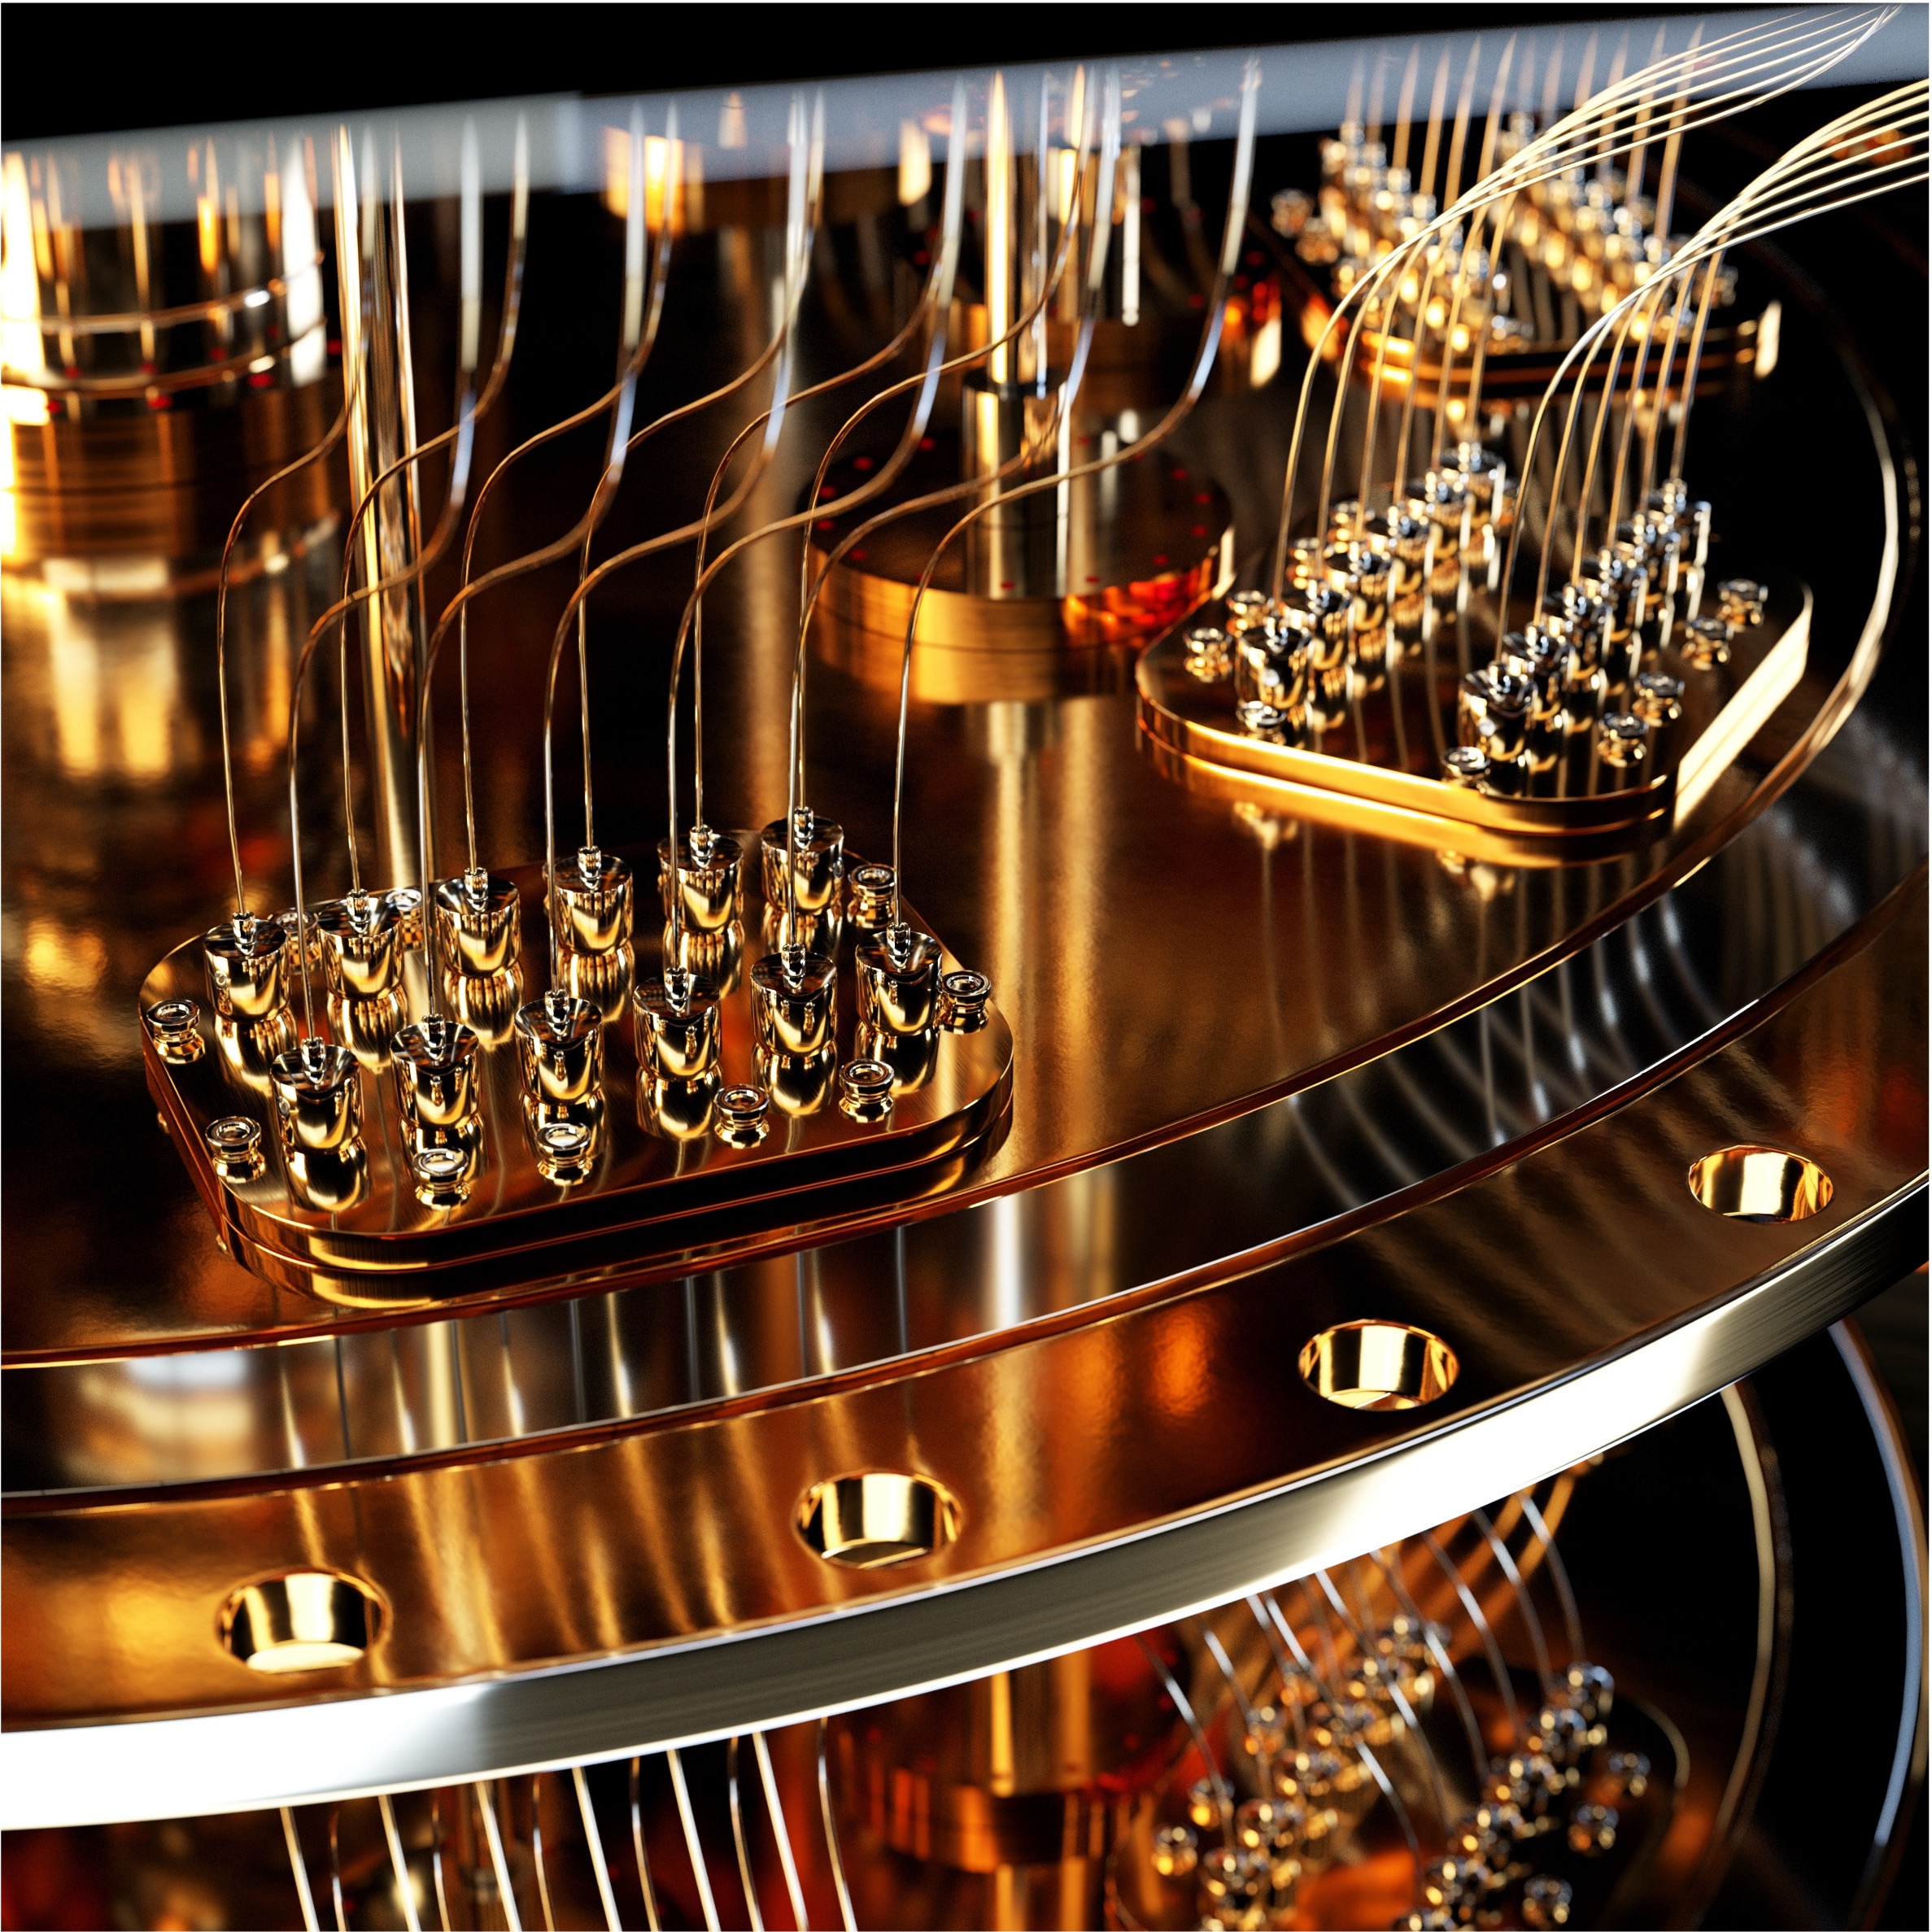 New report reveals opportunities in Japan for UK quantum computing firms